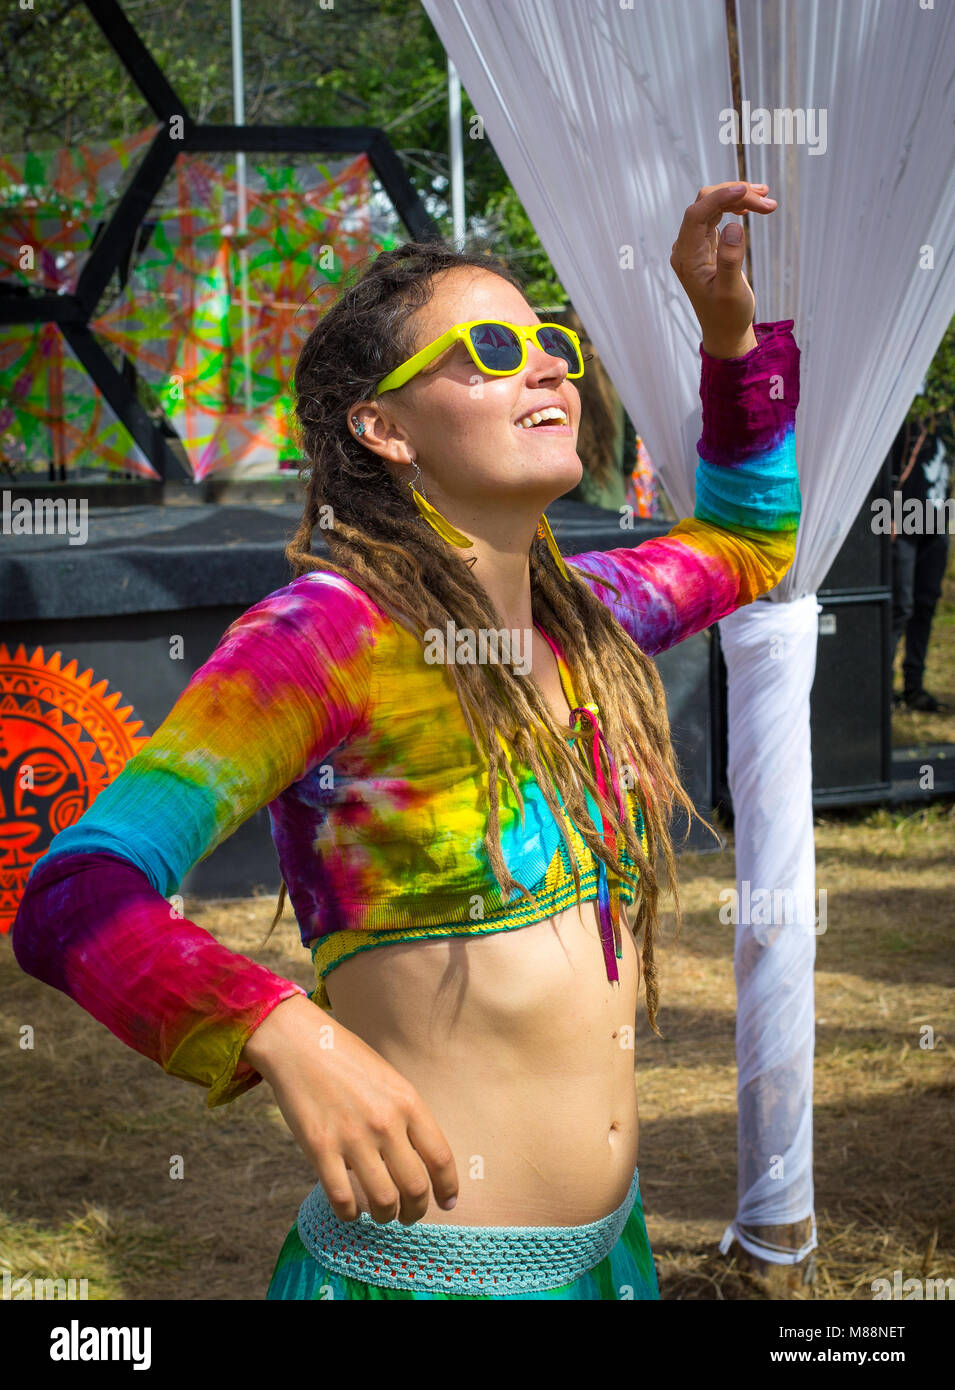 Cheerful girl with dreadlocks in colorful top is dancing at the festival FOURЭ. Summer. Almaty region. Kazakhstan. Stock Photo